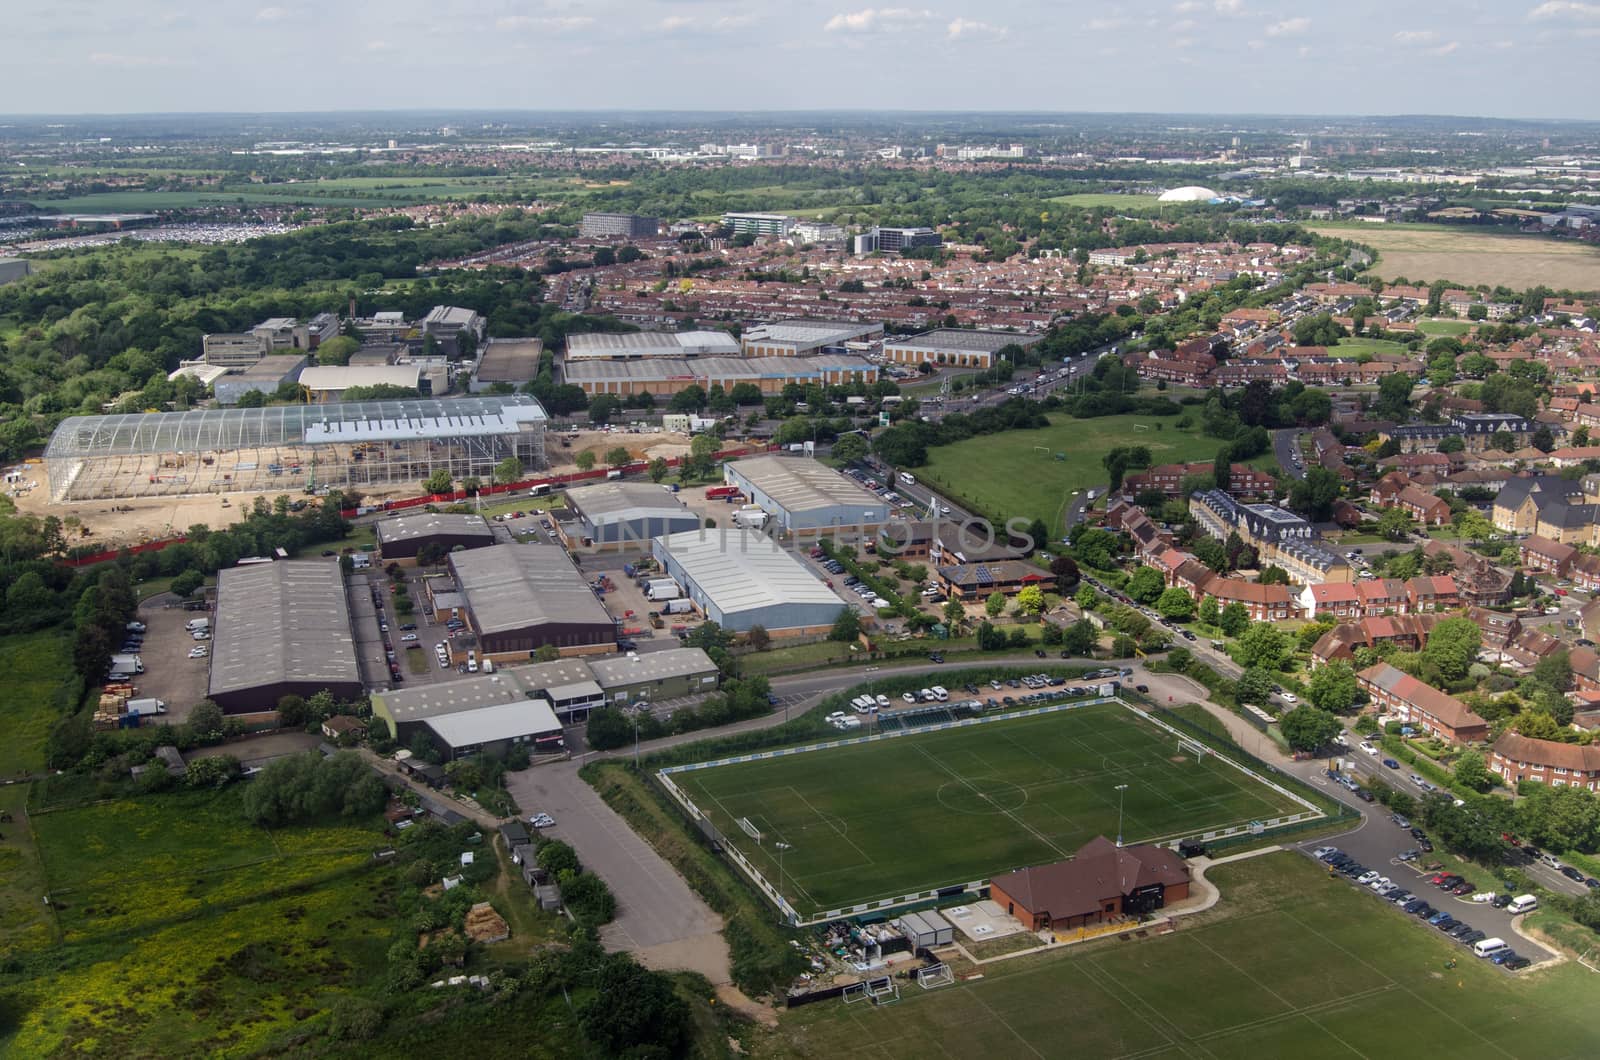 Aerial view of the CB Hounslow Sports Club and Heathrow International Trading Estate in West London on a sunny summer day.